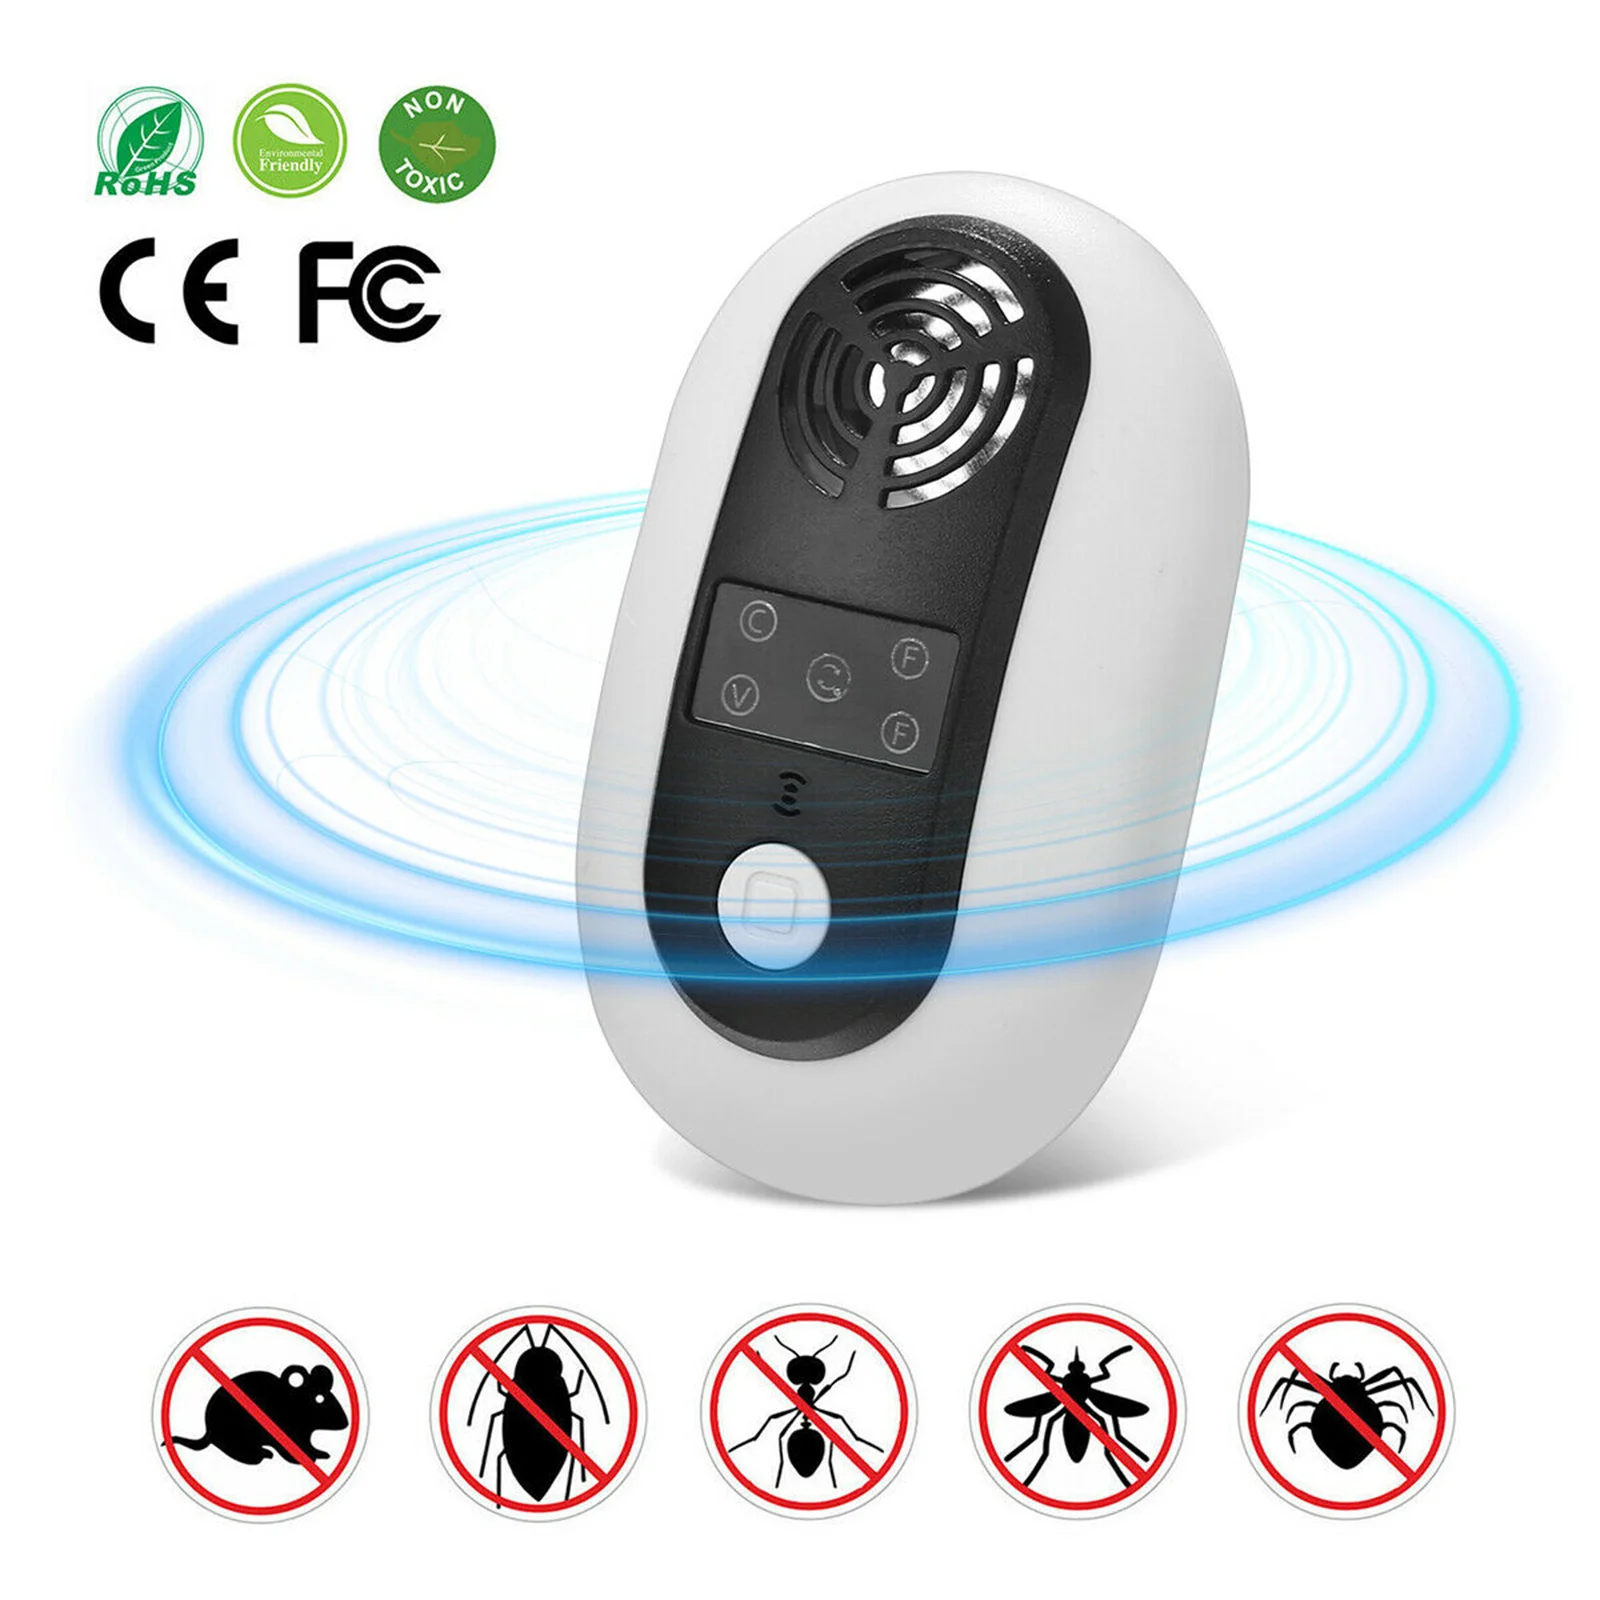 Фактор мыши. Electric Ultrasonic Pest Repeller 4w. Portable Ultrasonic Pest Repellent for Pets and people Outdoor Mosquito Repellents Kids.